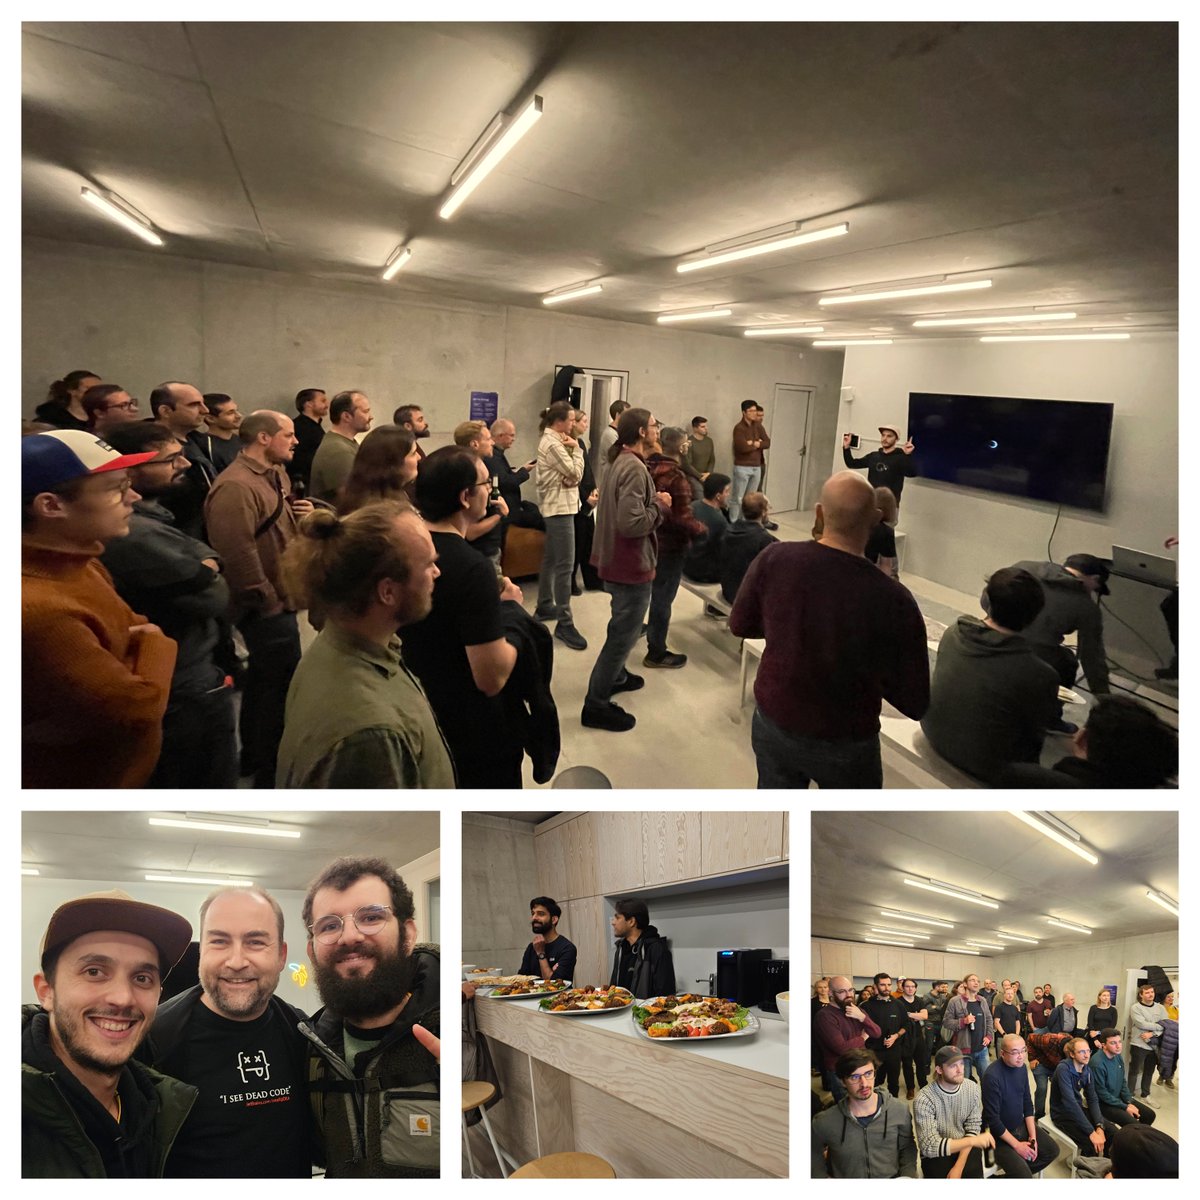 Berlin's MotherDuck/@duckdb meetup was a hit, full house! 🎉 Kudos to speakers @_Blef, @mesirii, our host @dltHub , @hfmuehleisen for joining and all attendees. Catch the session soon on our channel: youtube.com/@motherduckdb Stay tuned for the next one! 🗓️👀